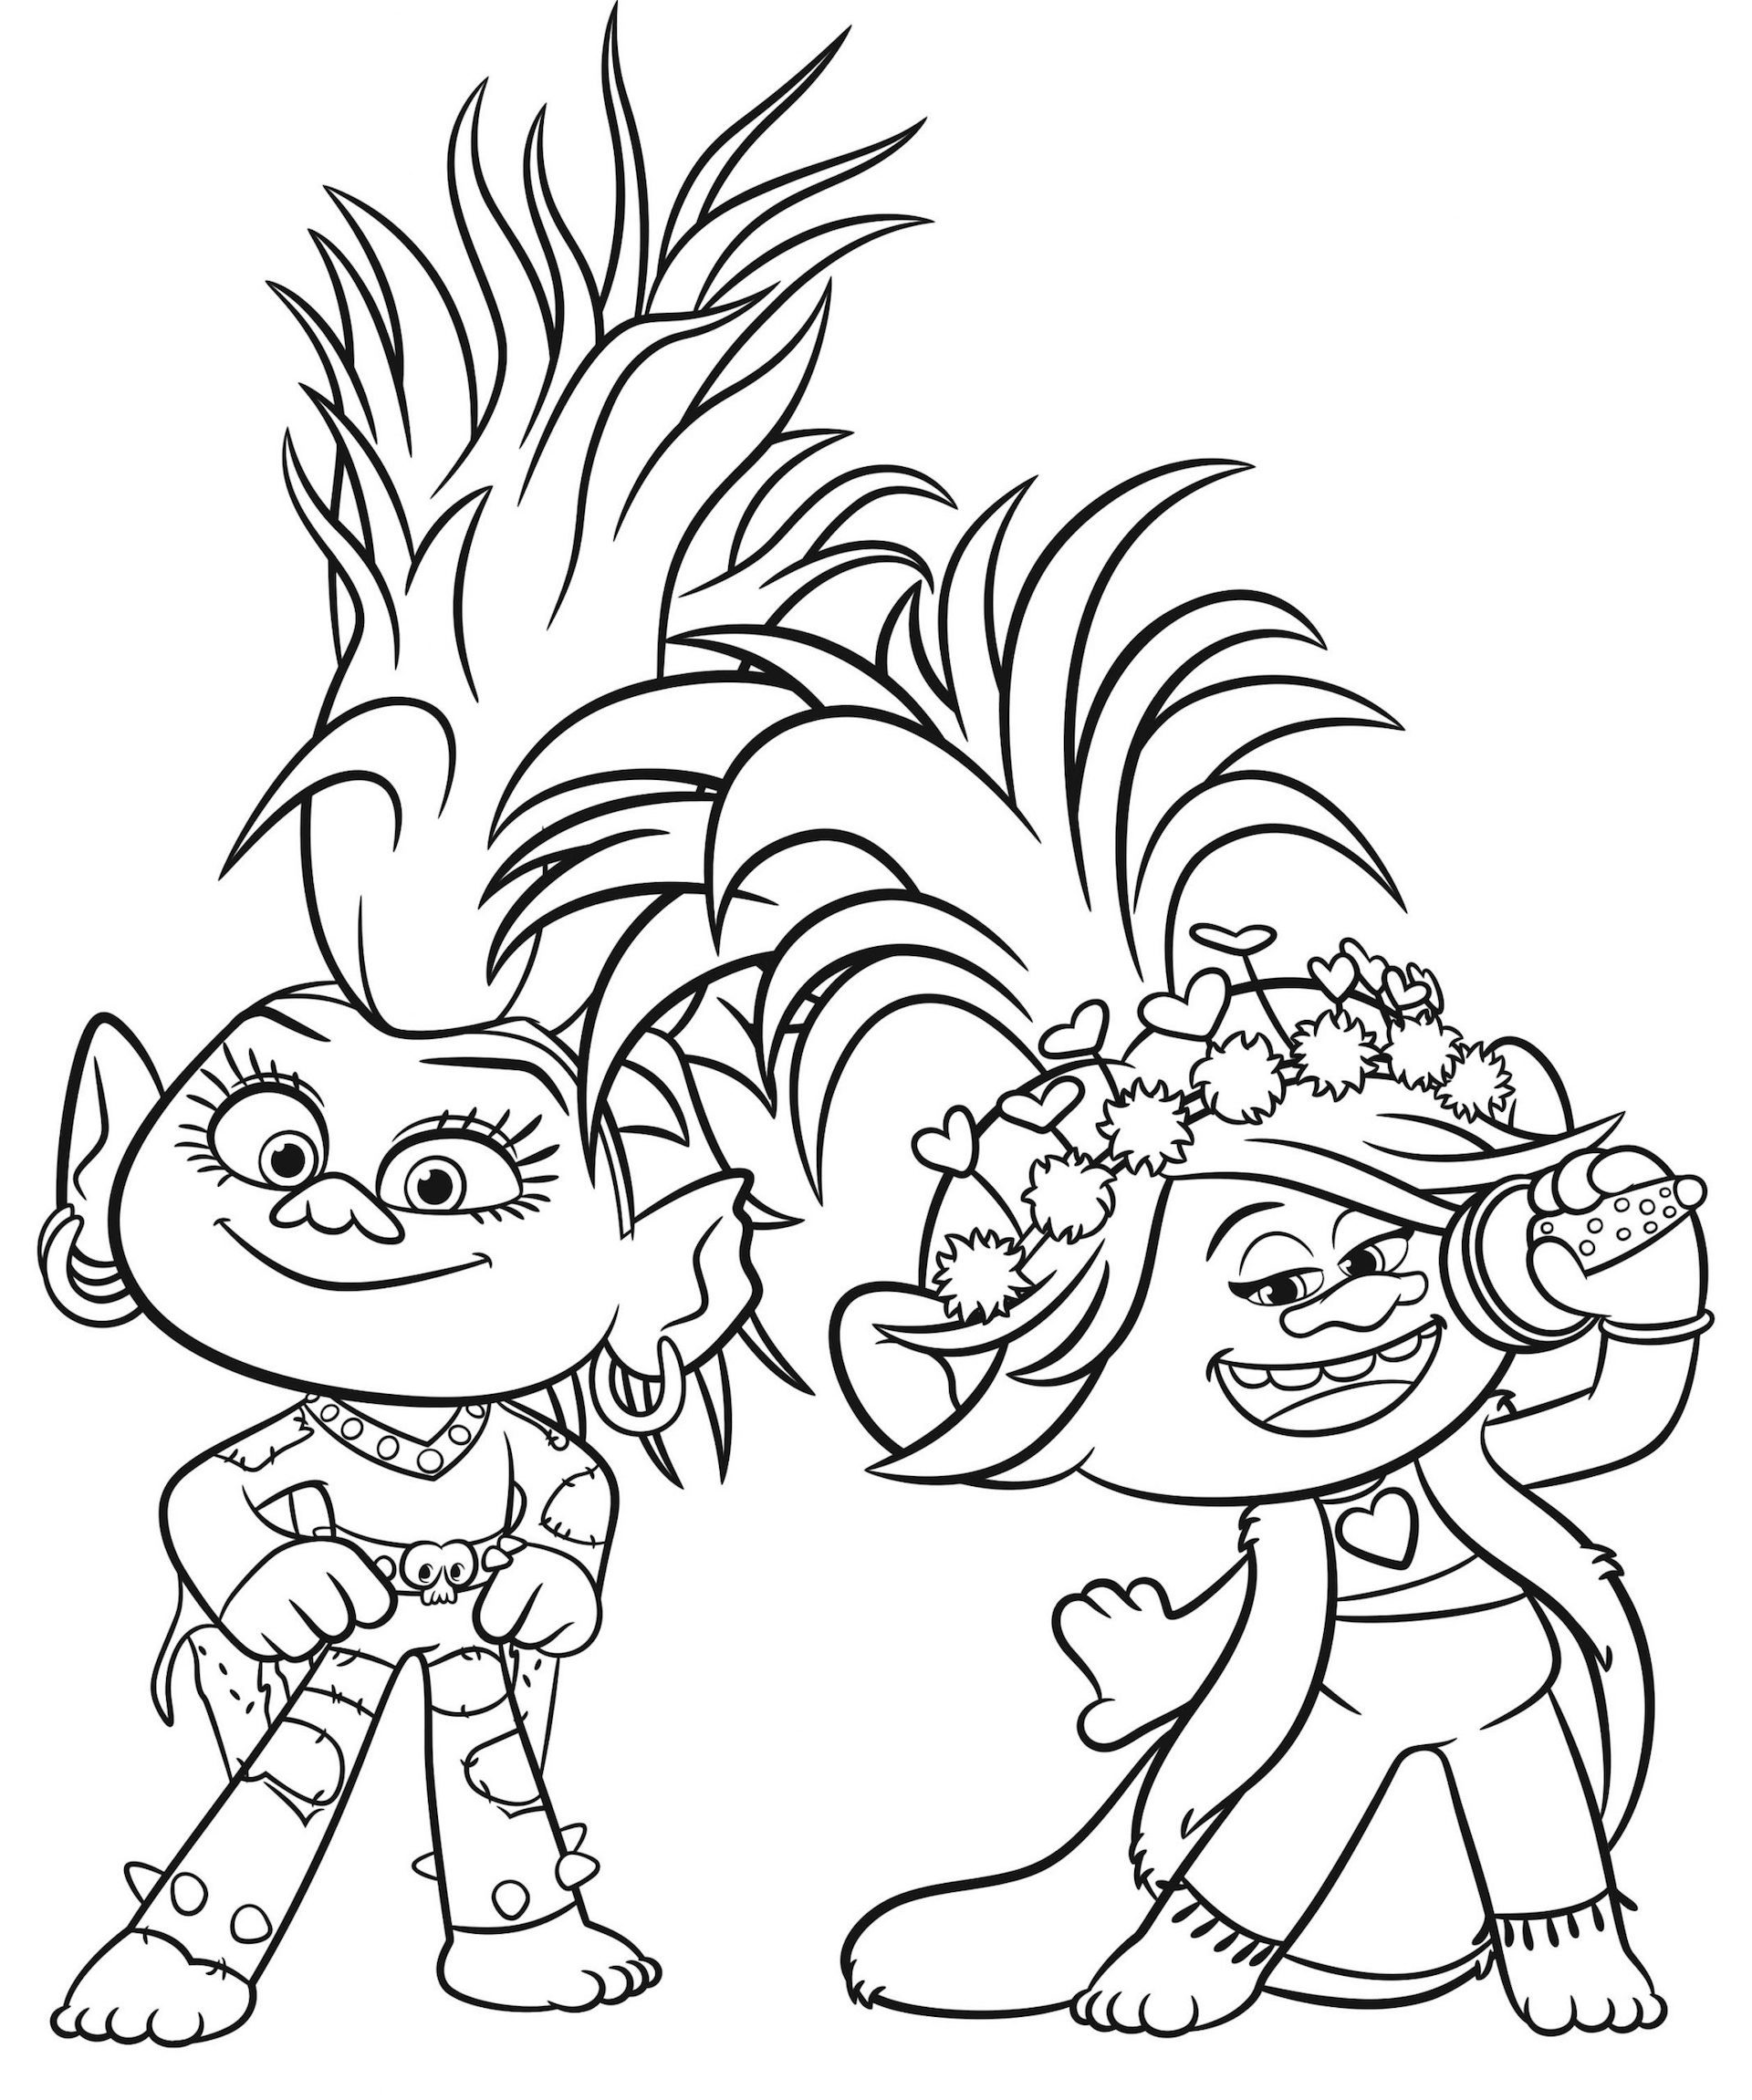 Trolls 2 Coloring Pages & book for kids | Best Trolls Coloring pages